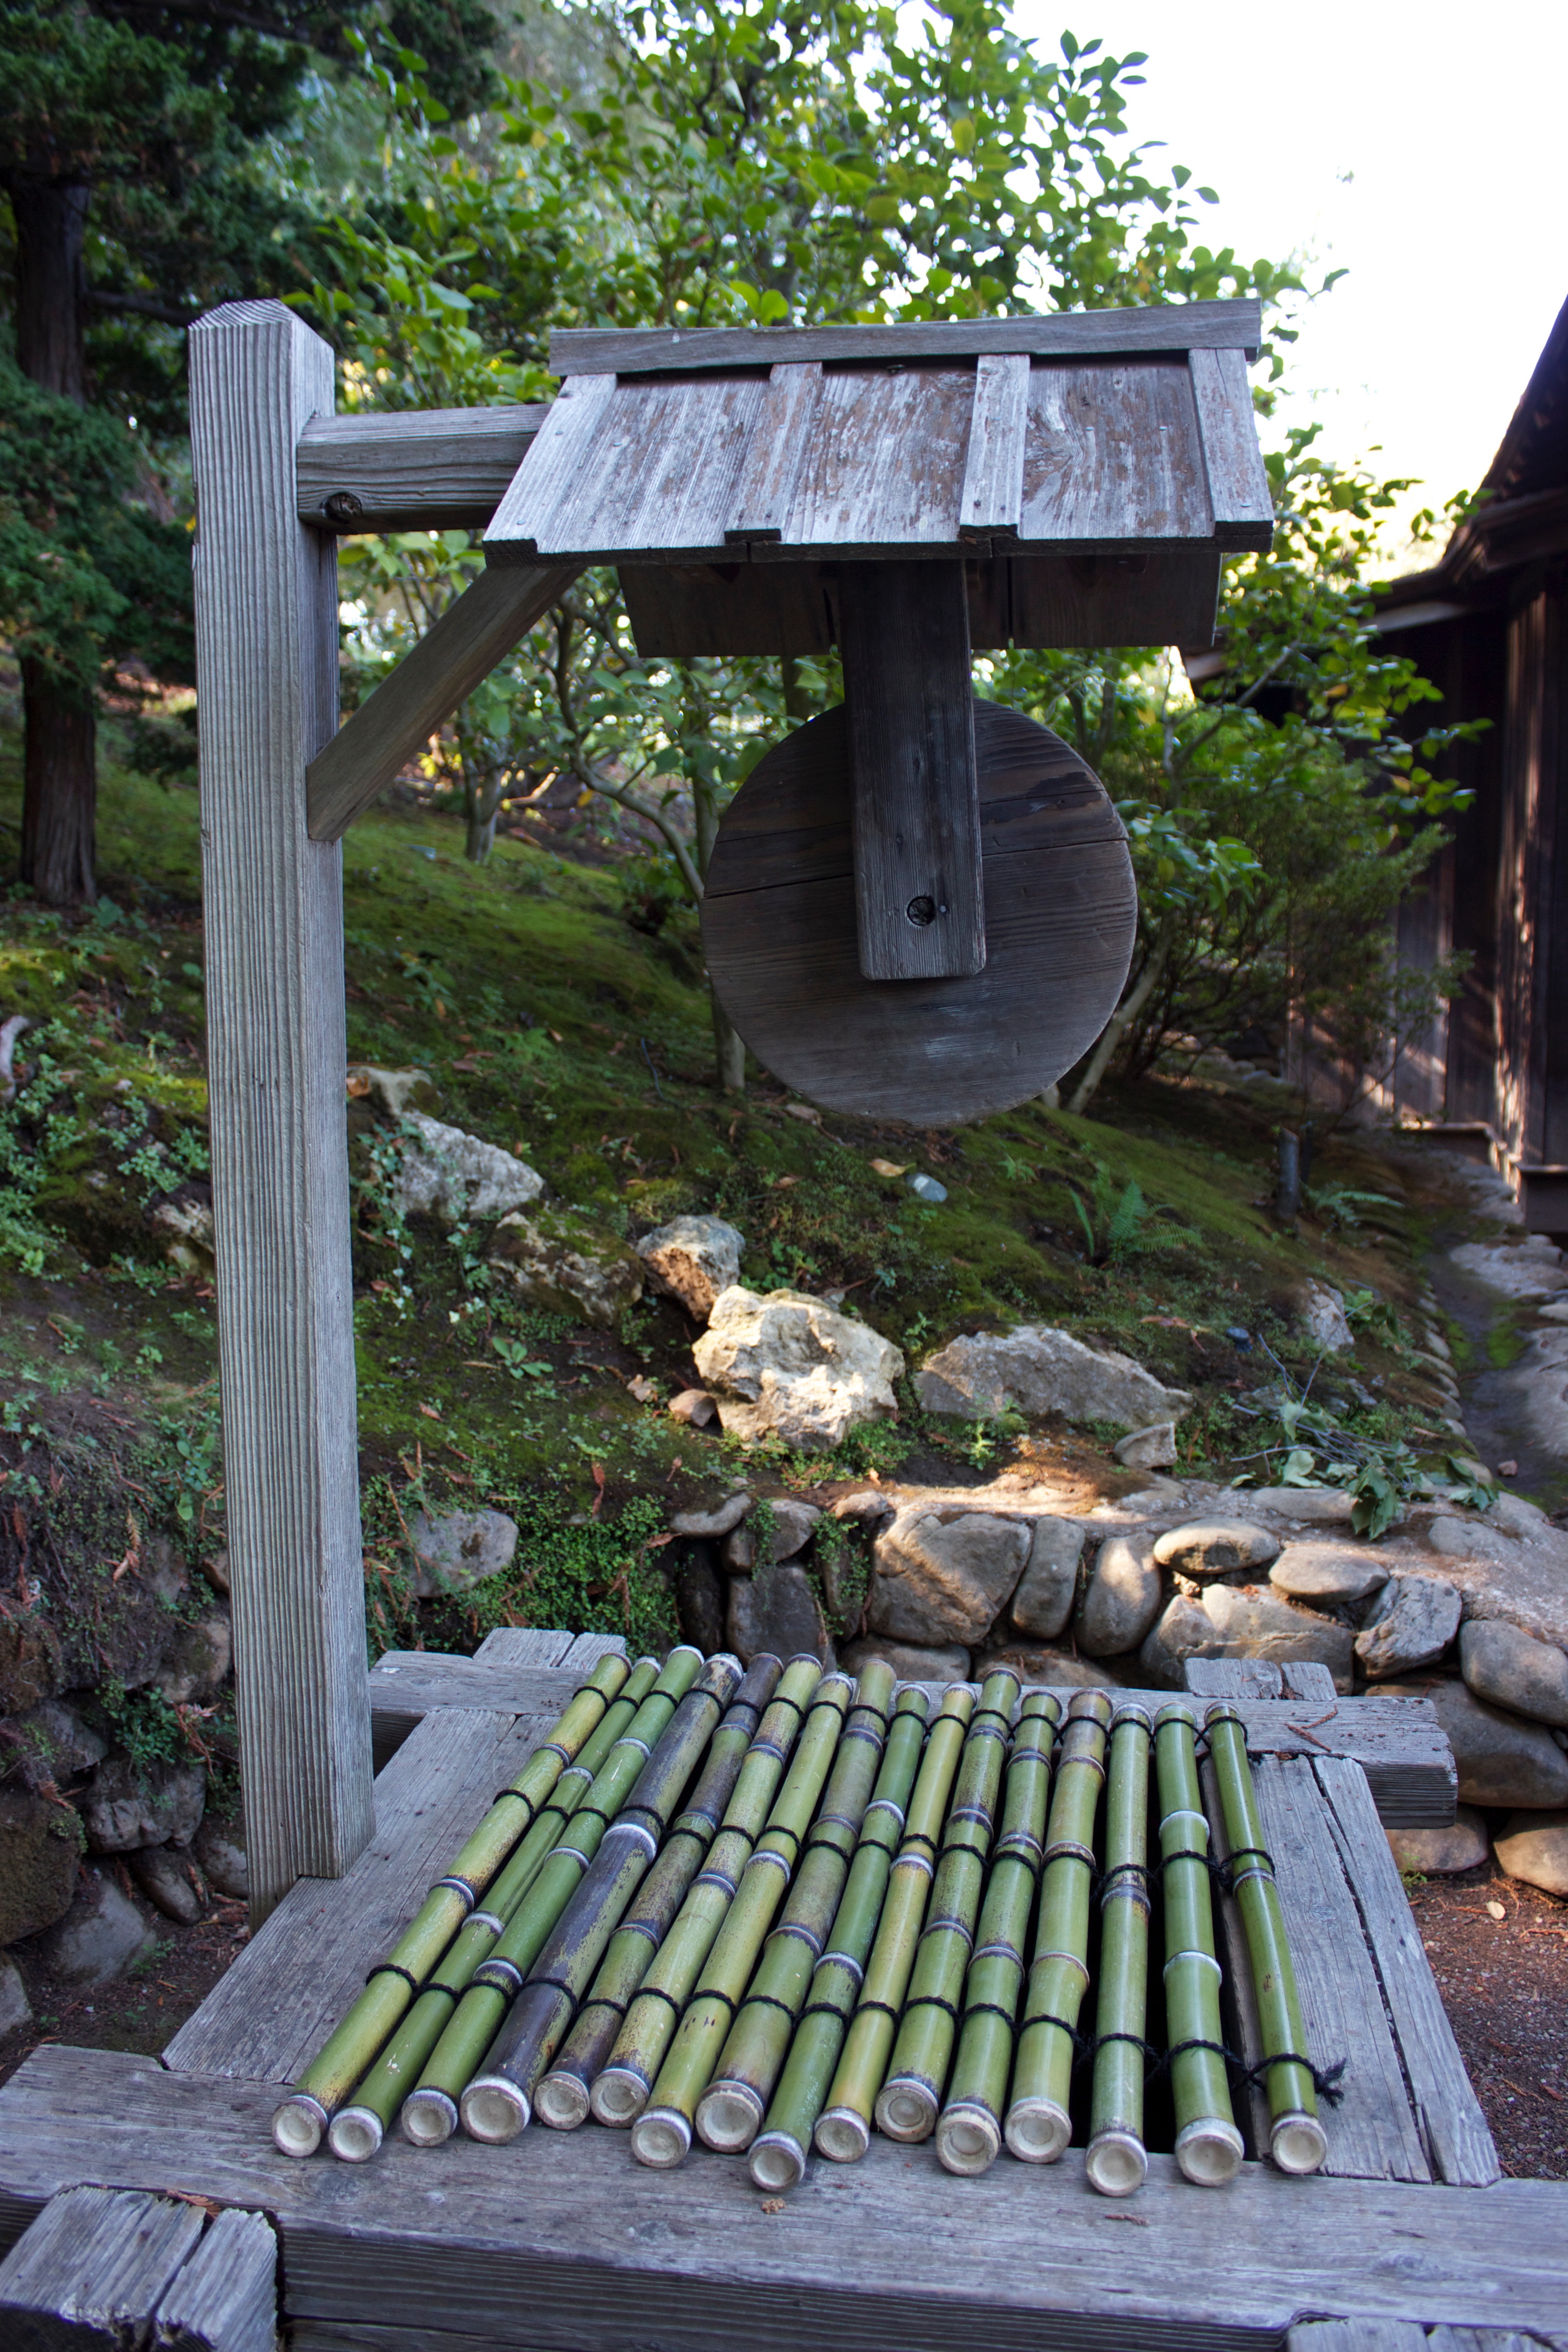 An old wooden water well in a Japanese garden, covered by bamboo stalks strung together. 